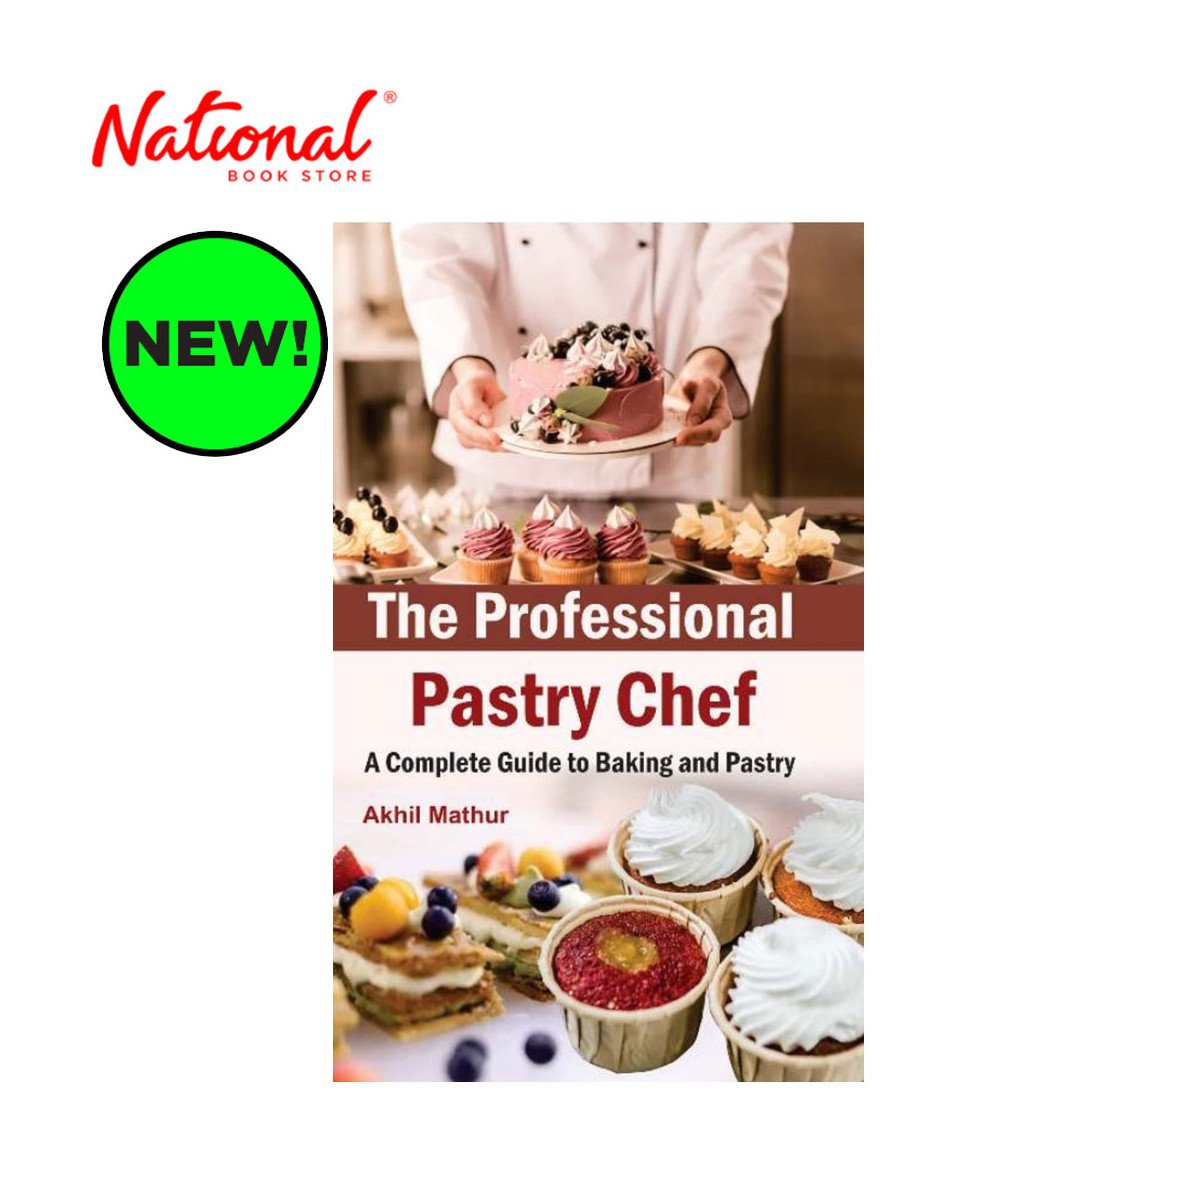 The Professional Pastry Chef: A Complete Guide to Baking & Pastry by Akhil Mathur - Trade Paperback